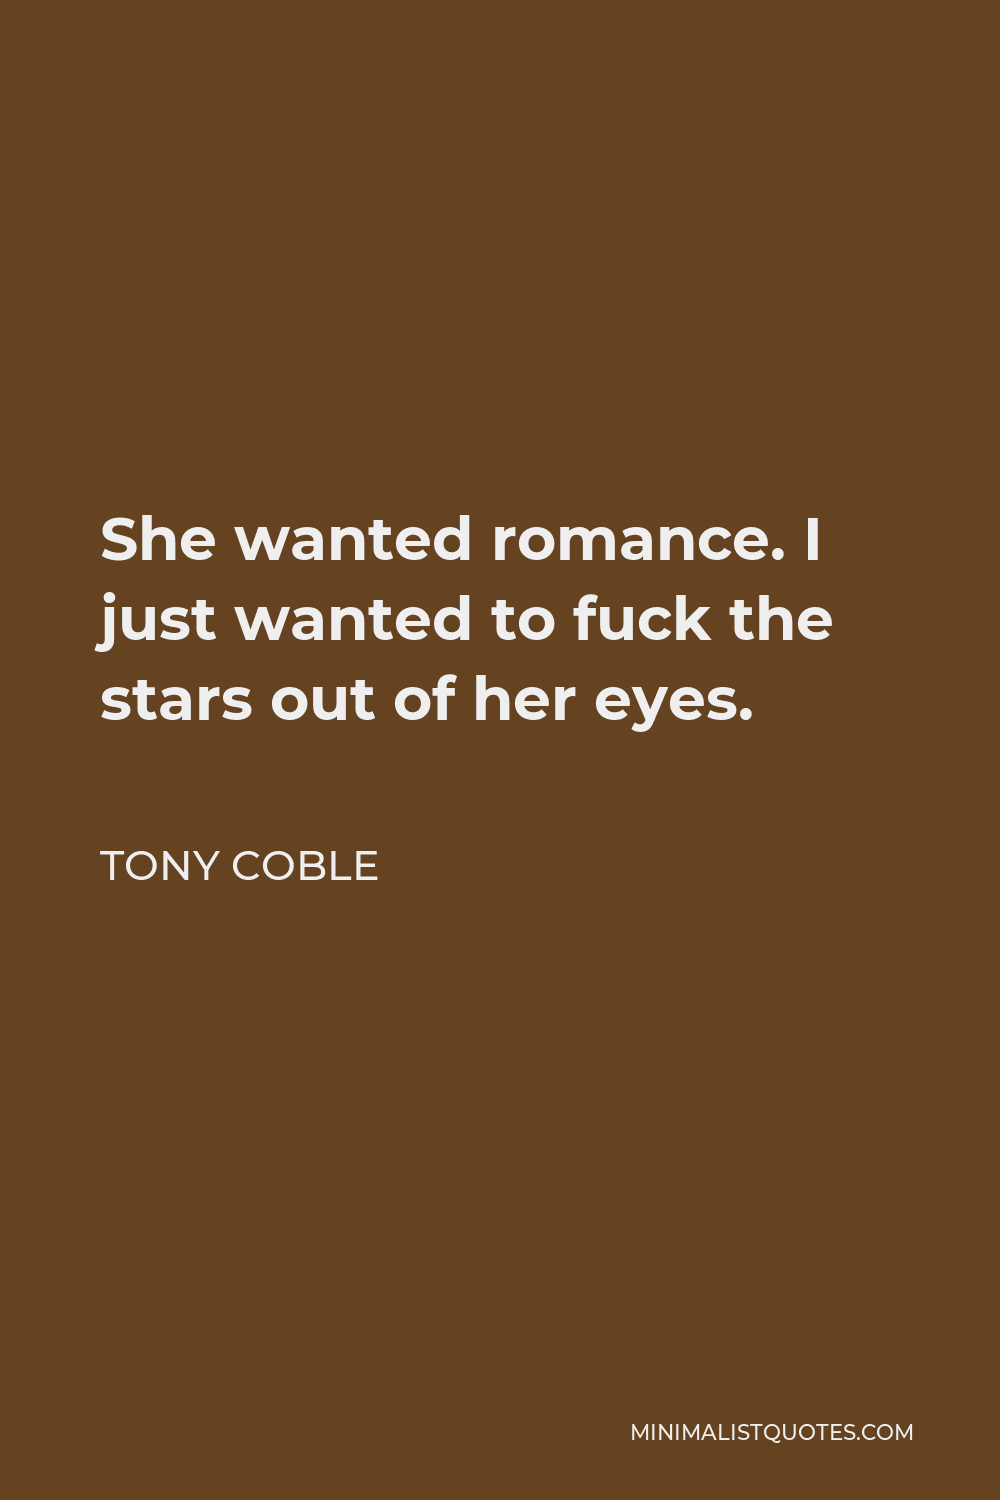 Tony Coble Quote - She wanted romance. I just wanted to fuck the stars out of her eyes.